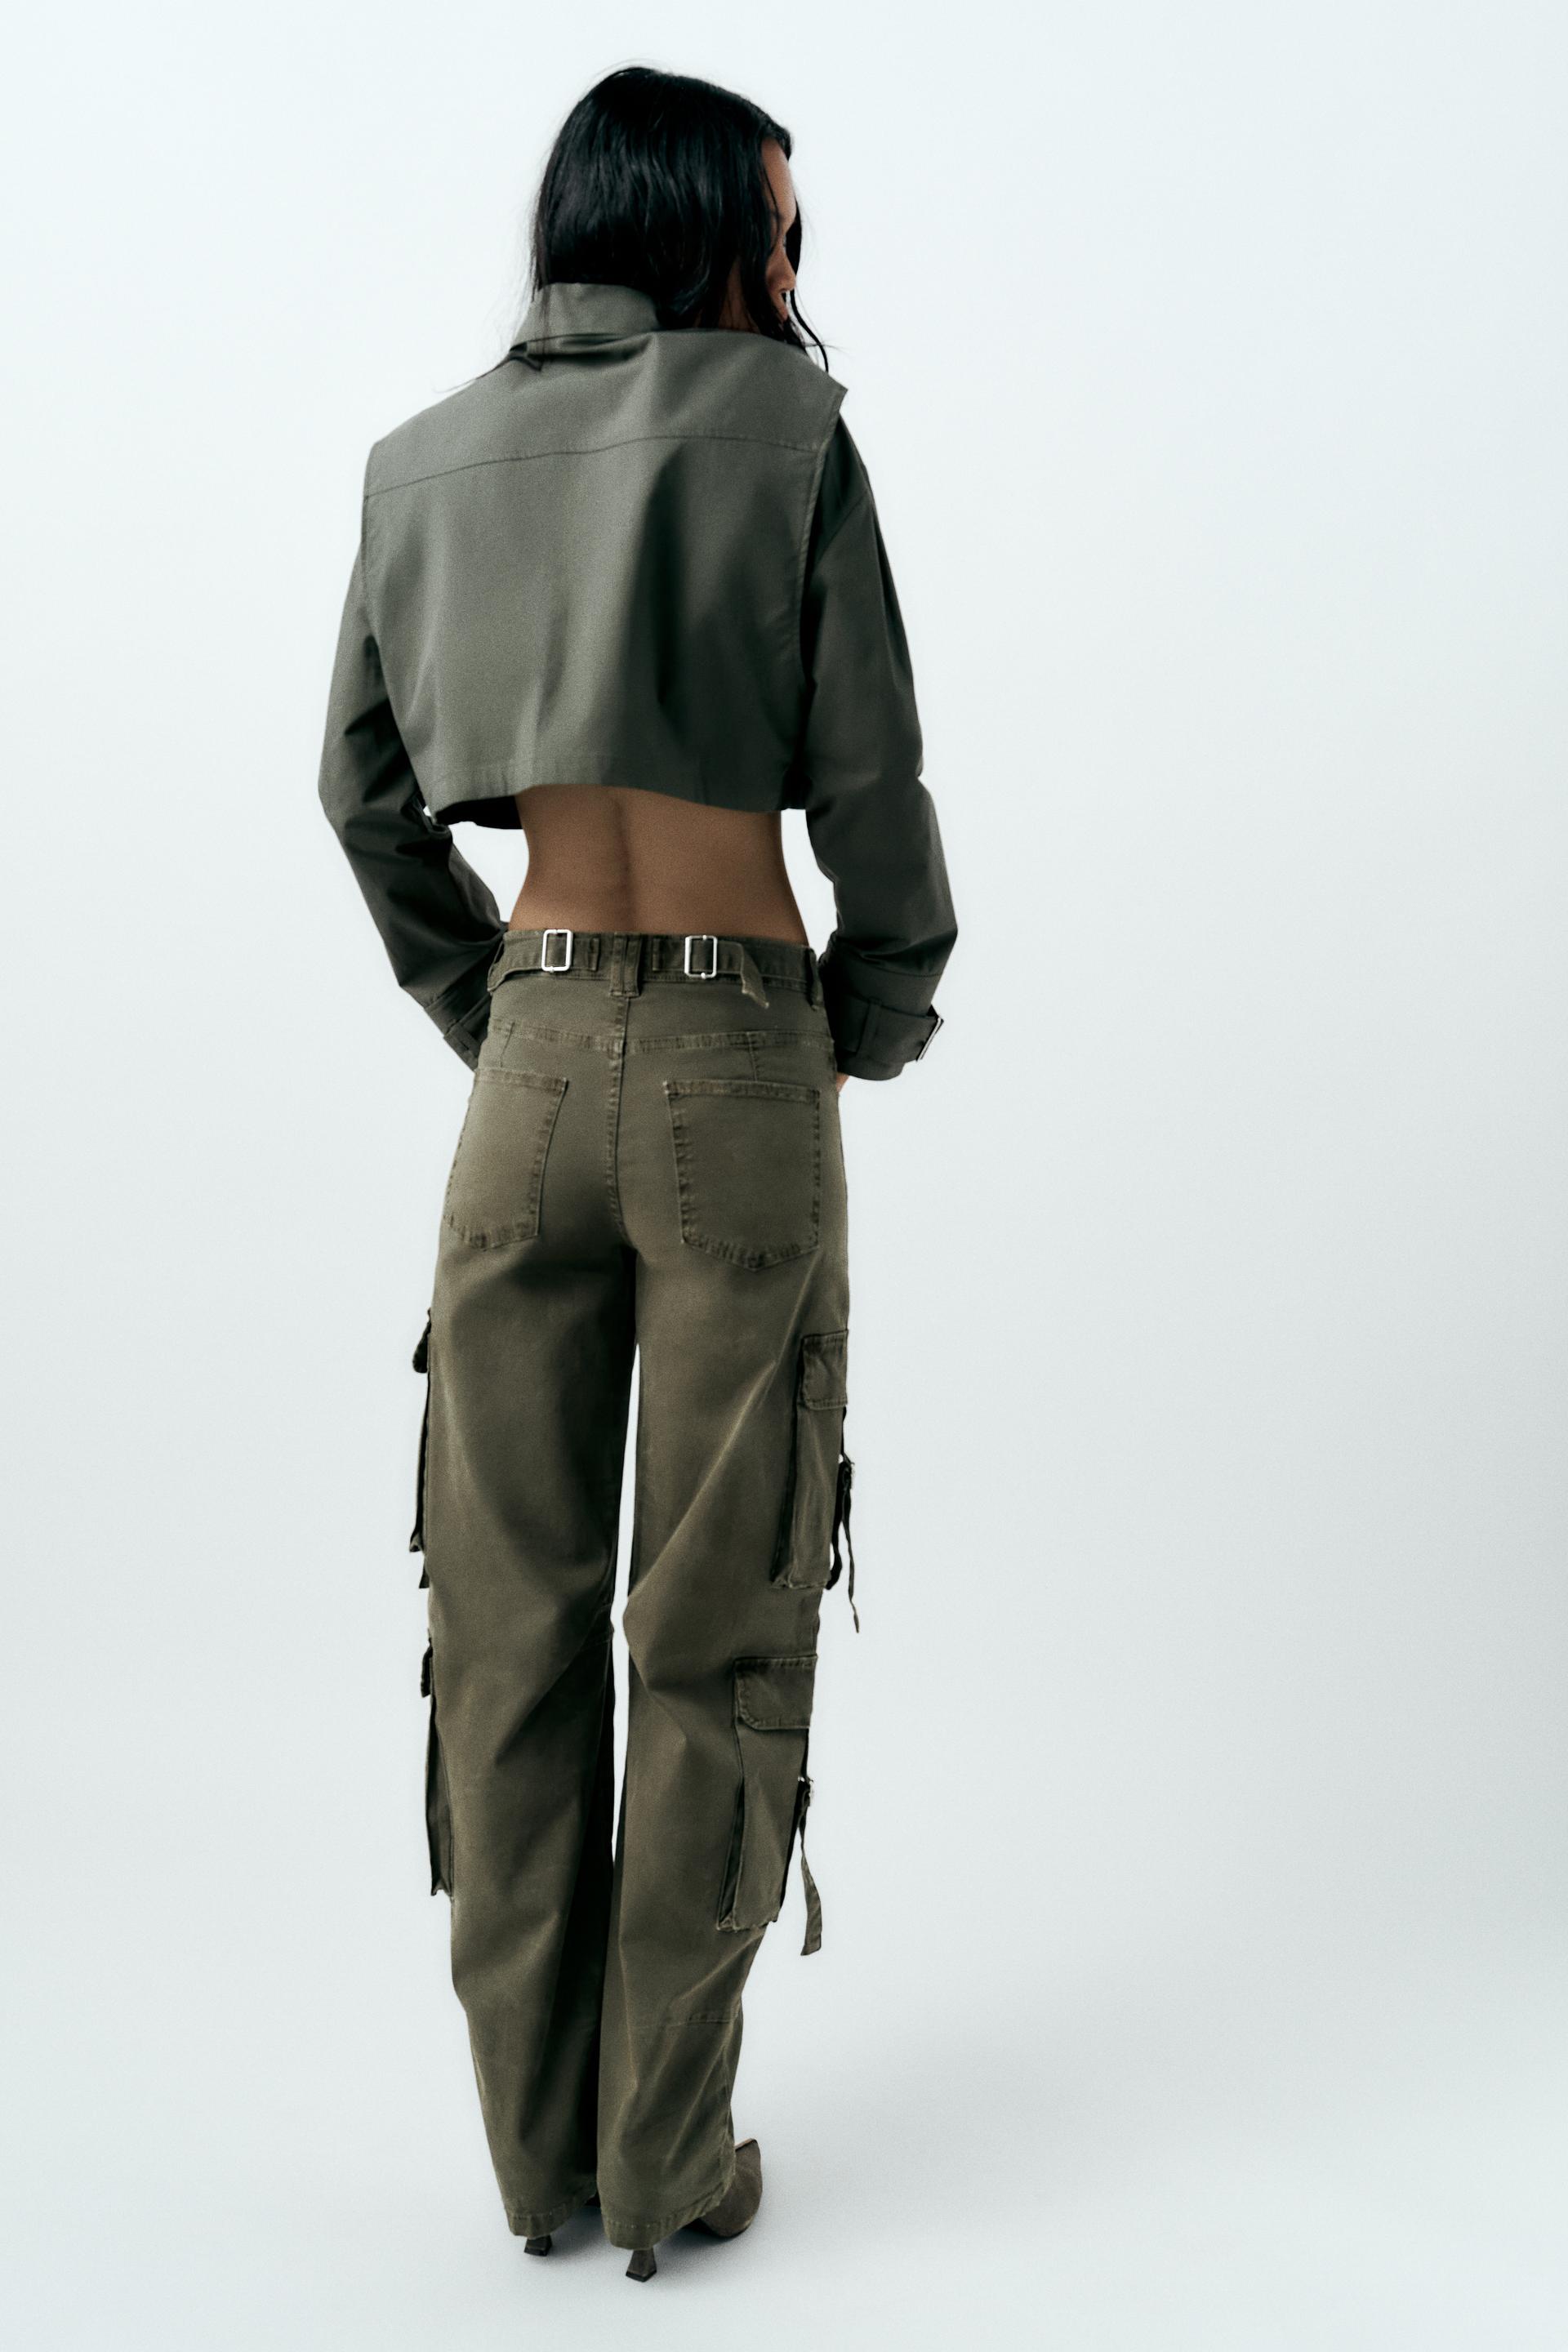 Remember these men's cargo pants from Zara?? Well they are back in